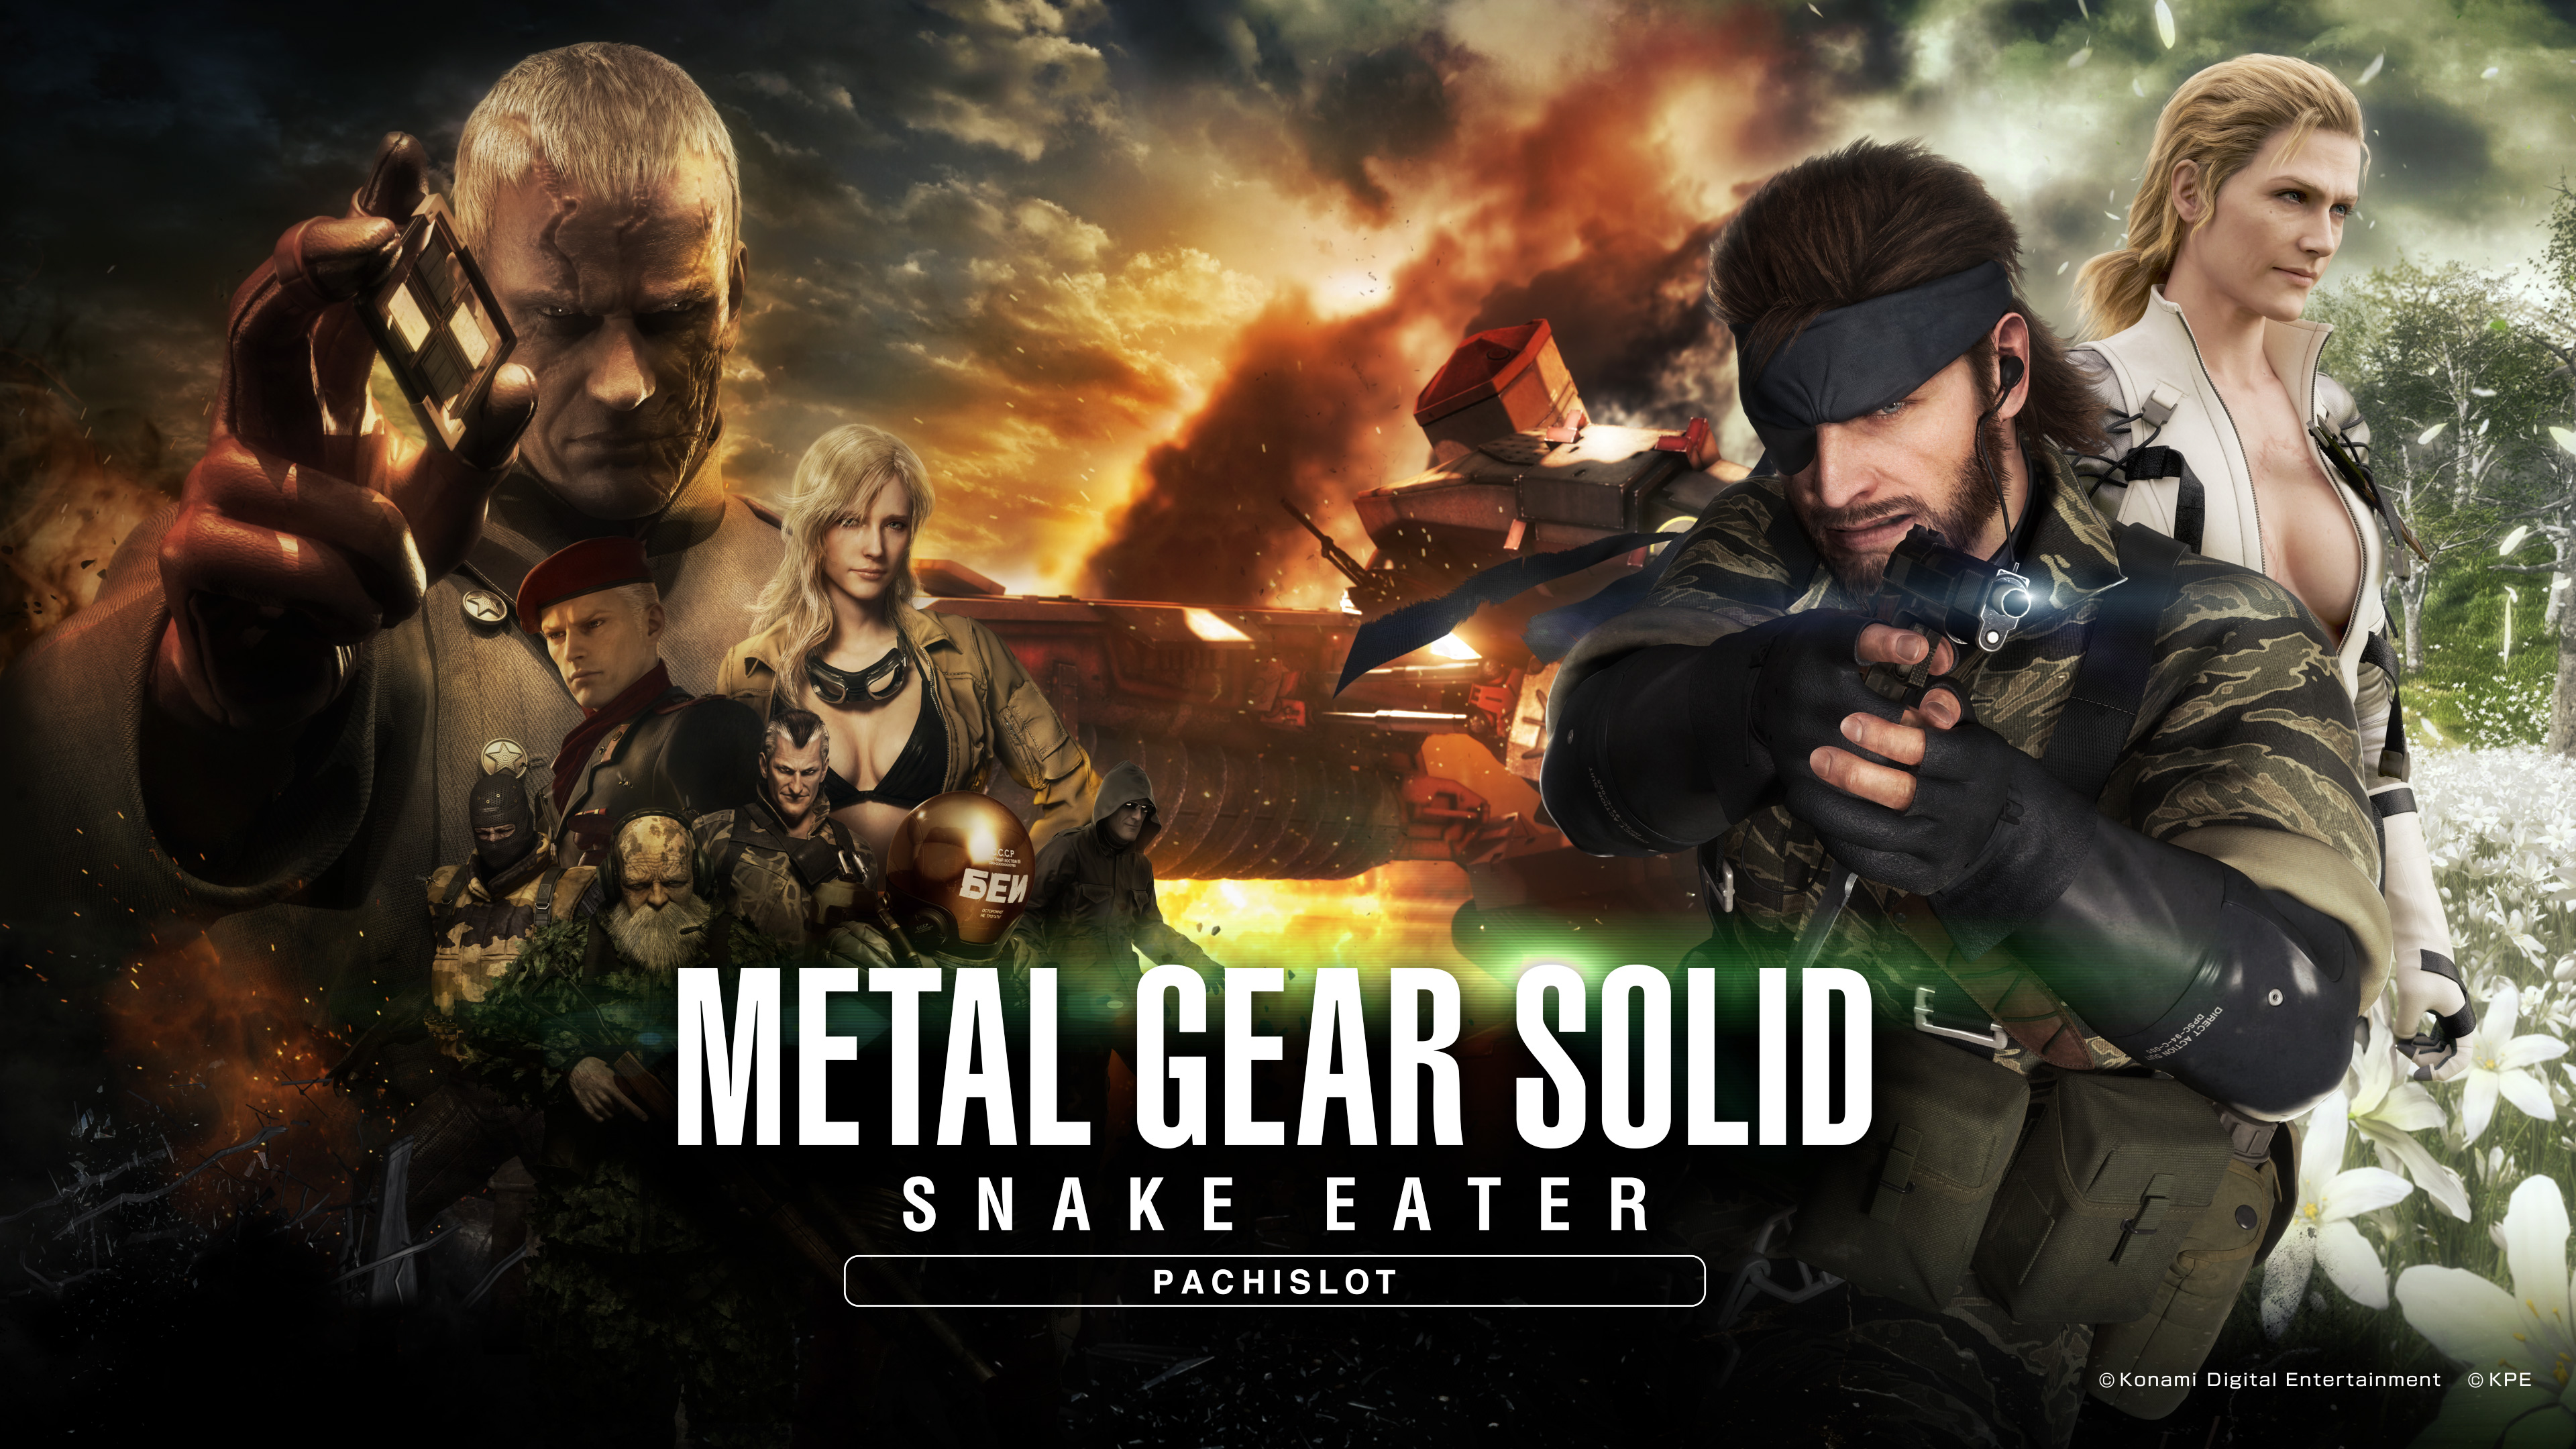 Official Metal Gear Solid Snake Eater Pachislot wallpapers